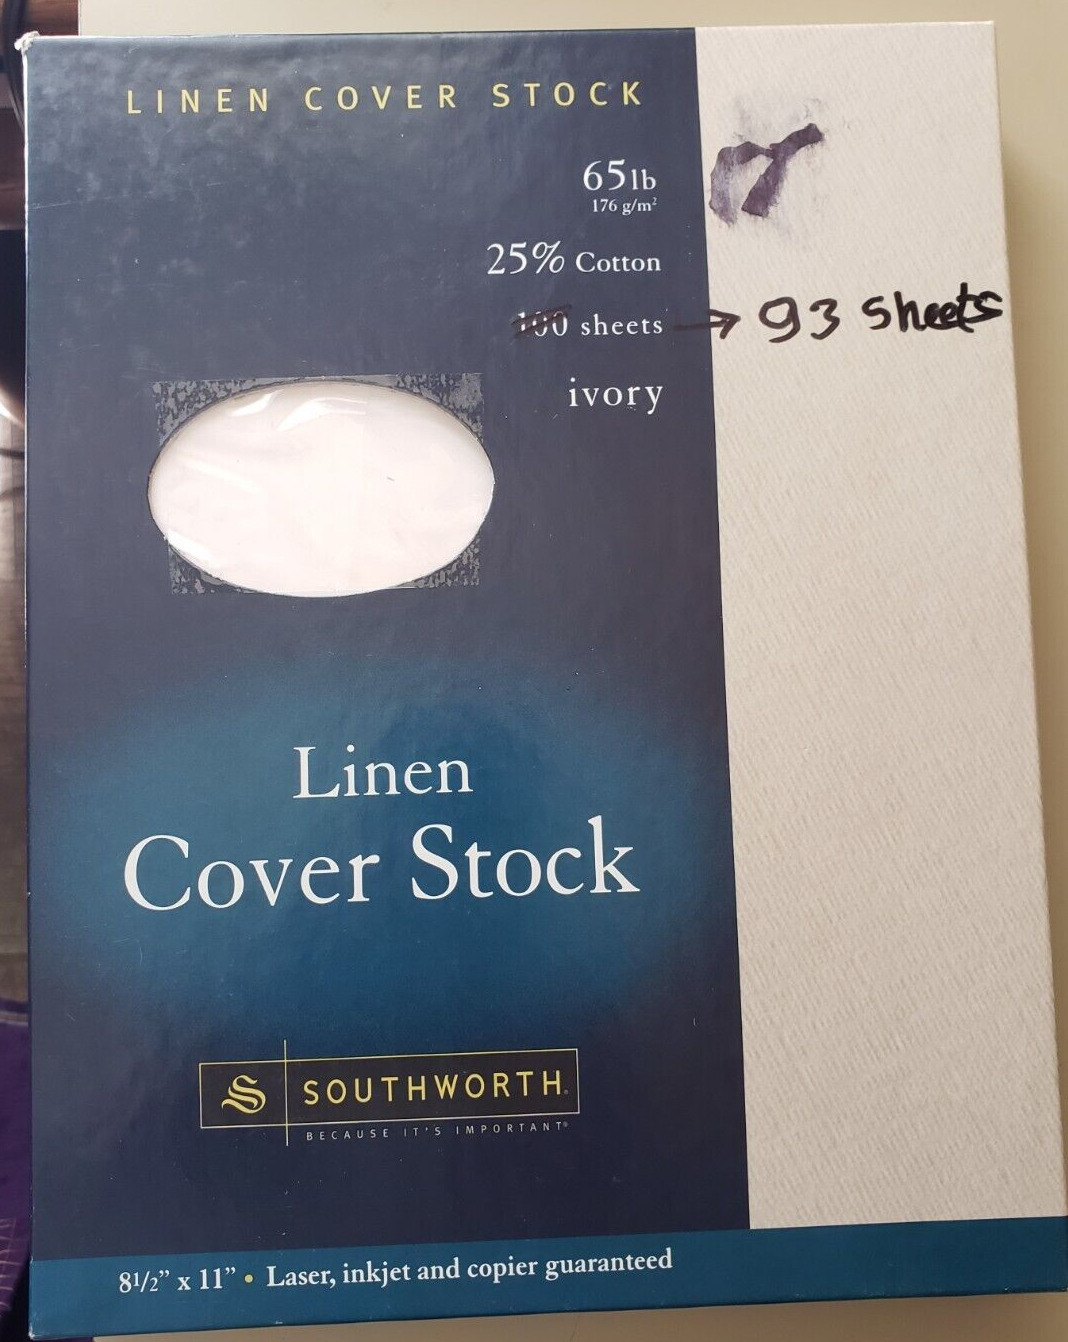 Southworth 25% Cotton Linen Copy/Inkjet/Laser Coverstock 65 lbs Ivory 93sheets